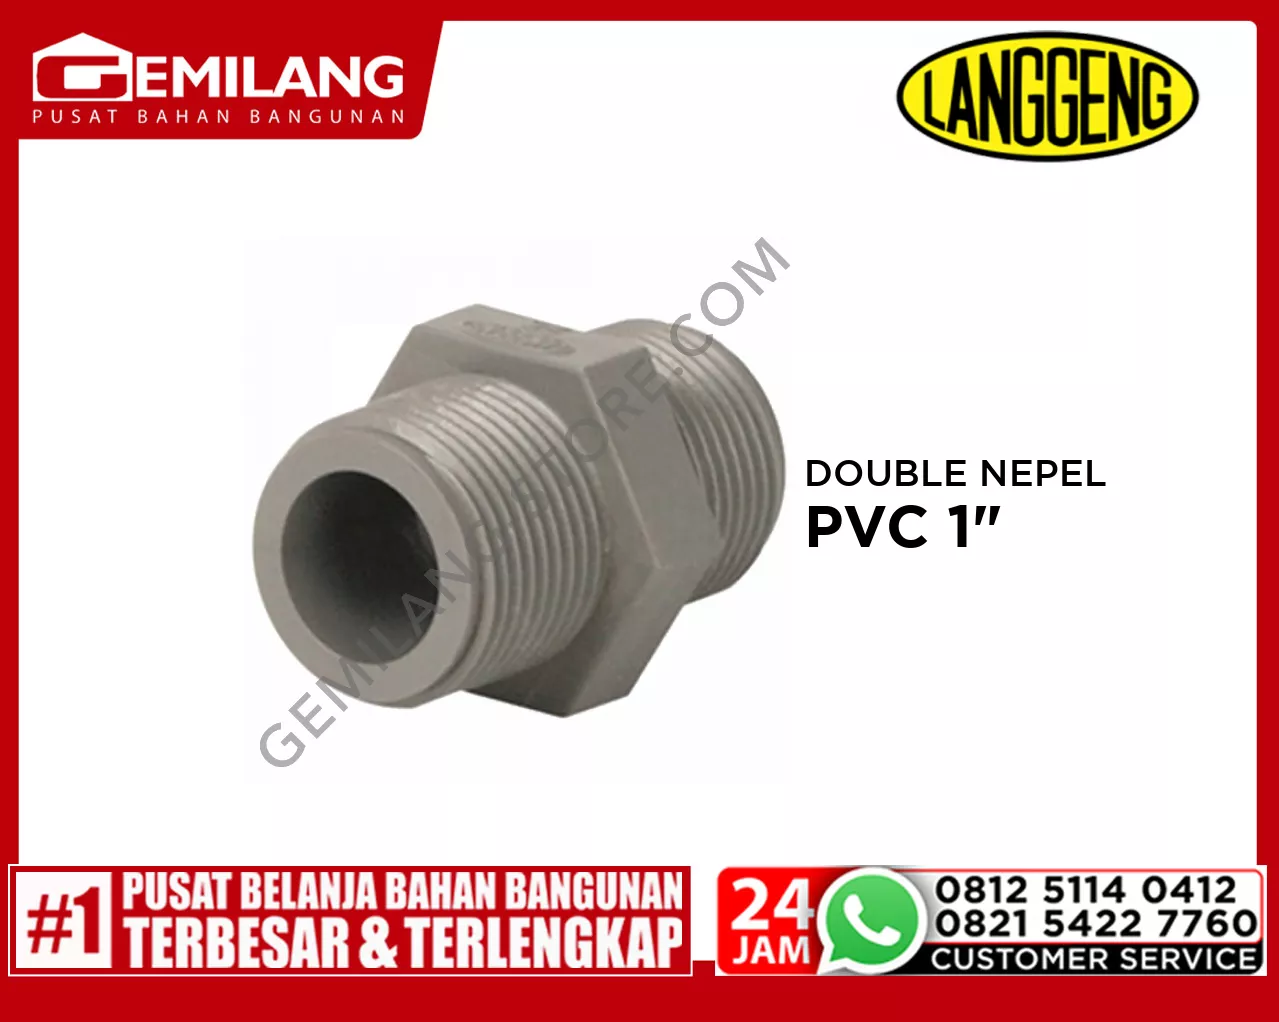 LANGGENG DOUBLE NEPEL PVC 1inch